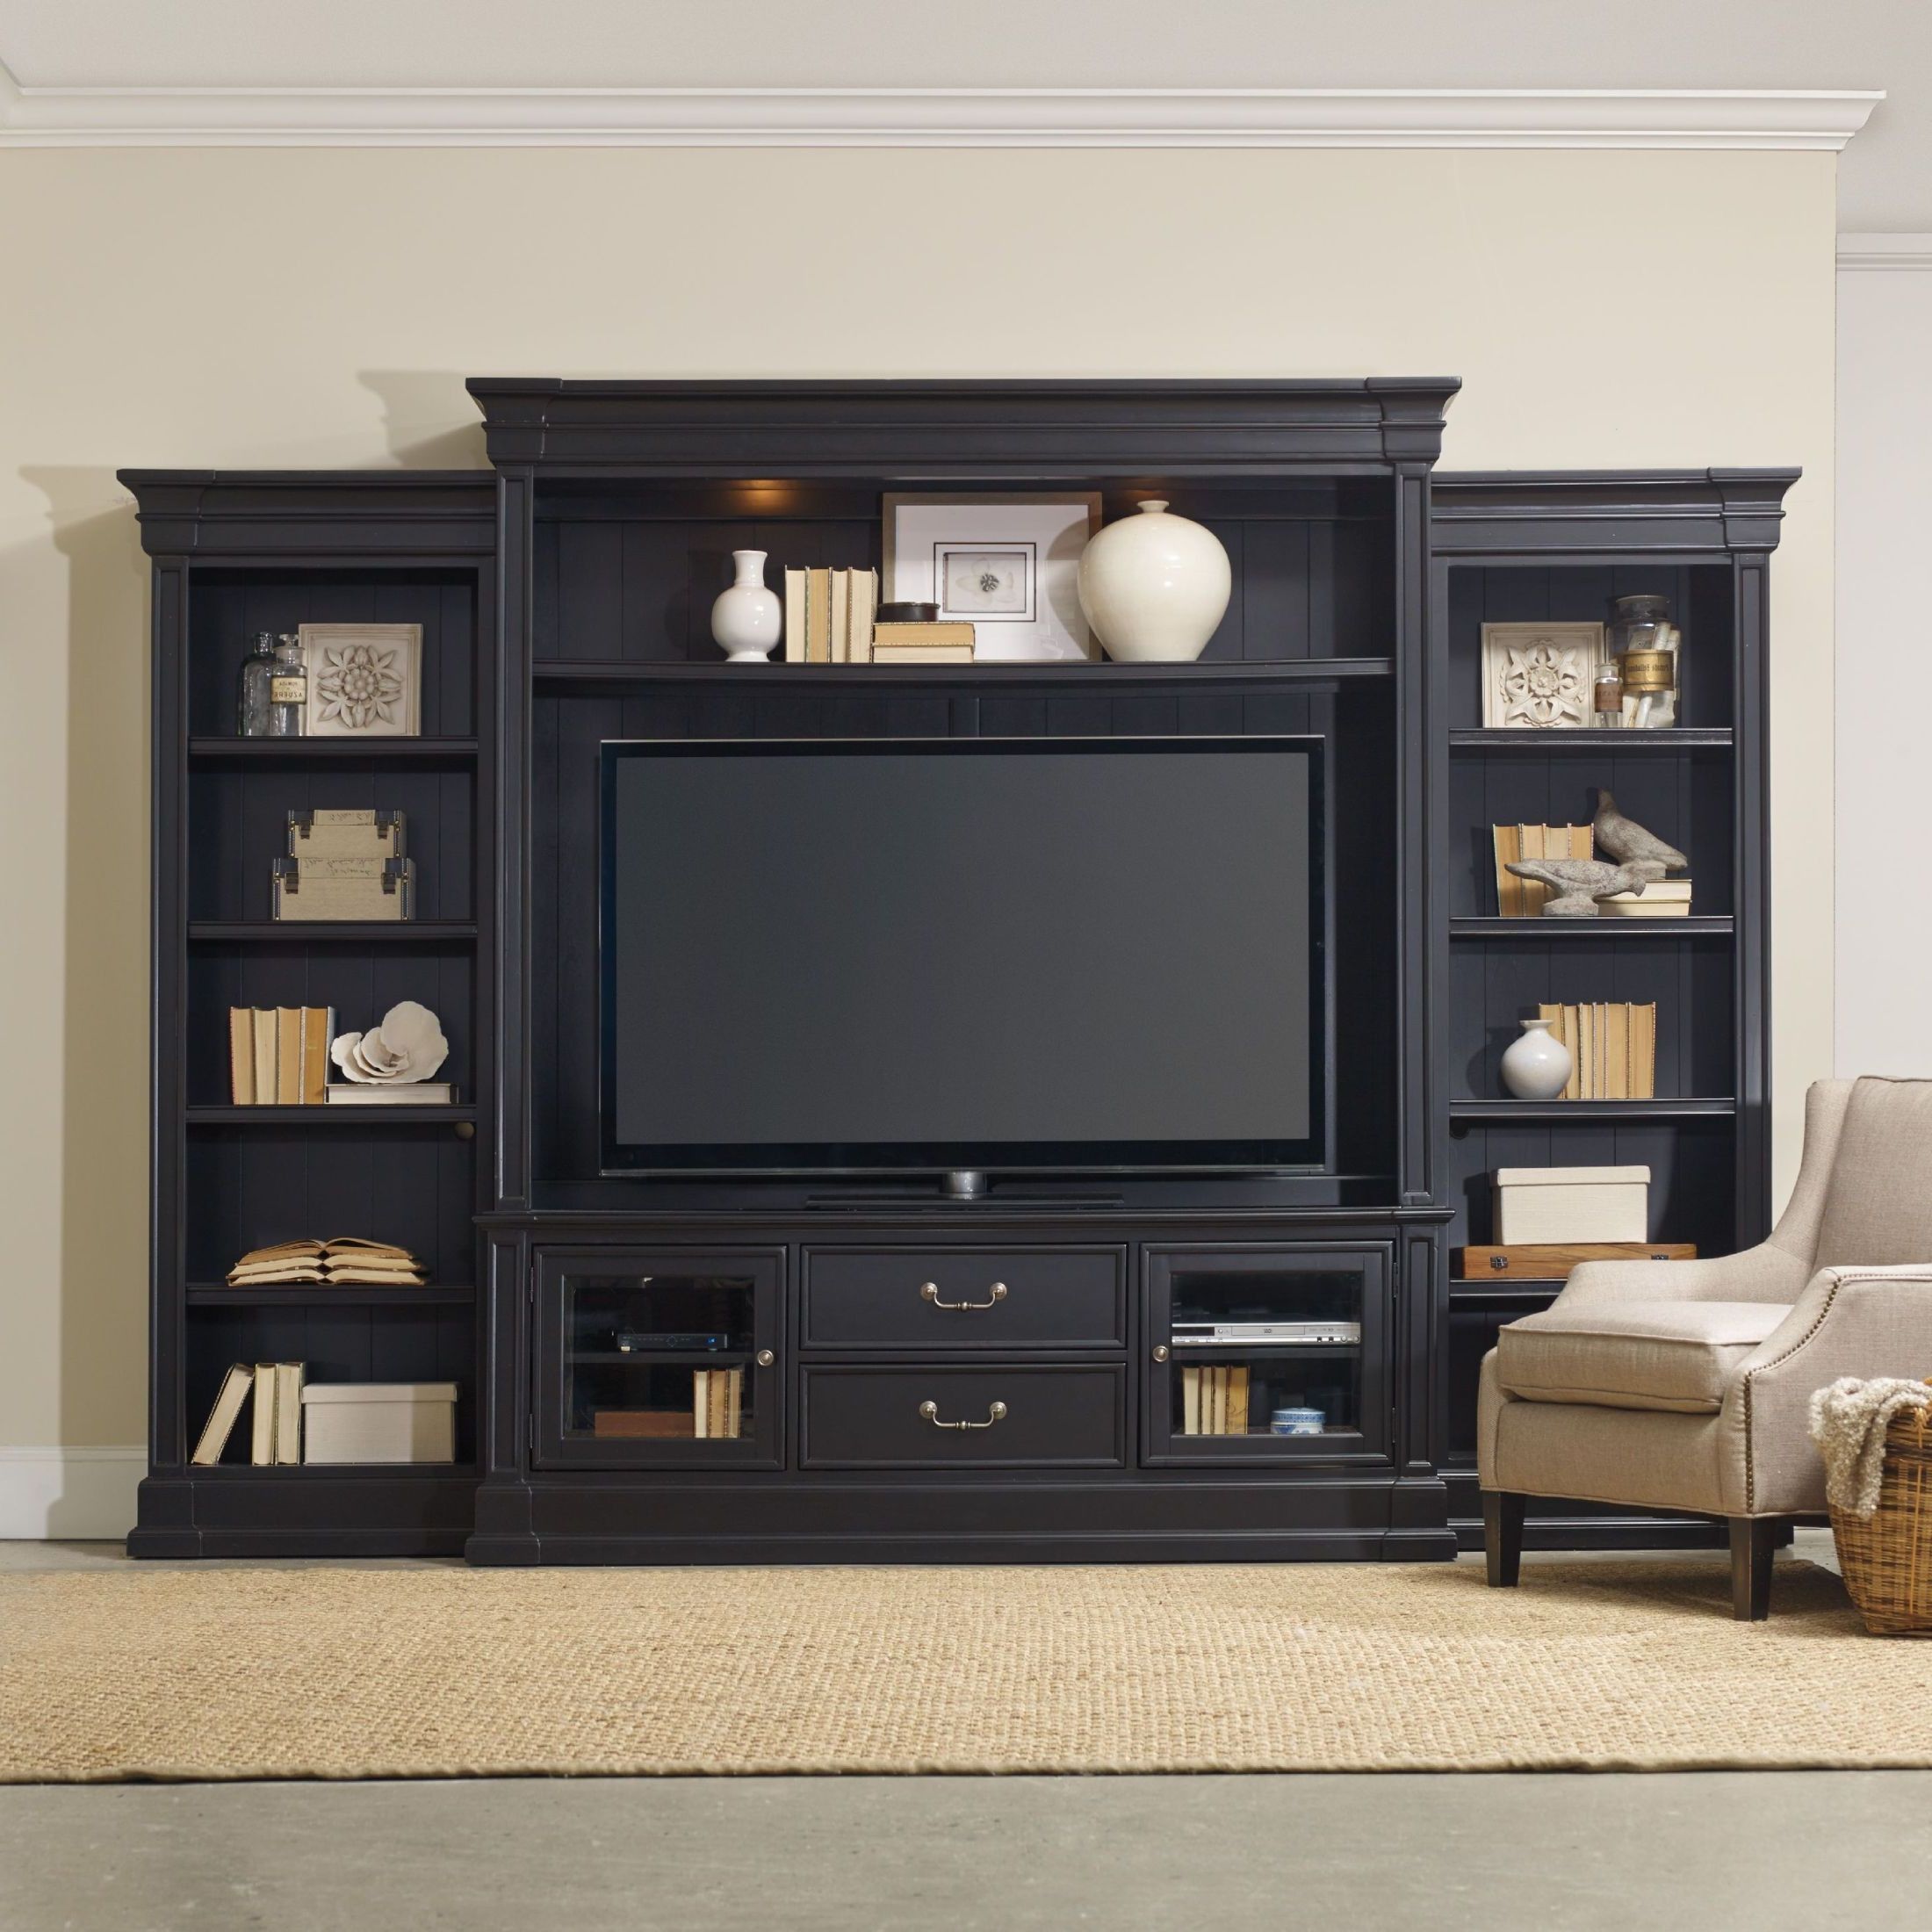 Widely Used Clermont Black Entertainment Wall Unit, 5371 70222, Hooker Furniture Inside Black Rgb Entertainment Centers (View 14 of 15)